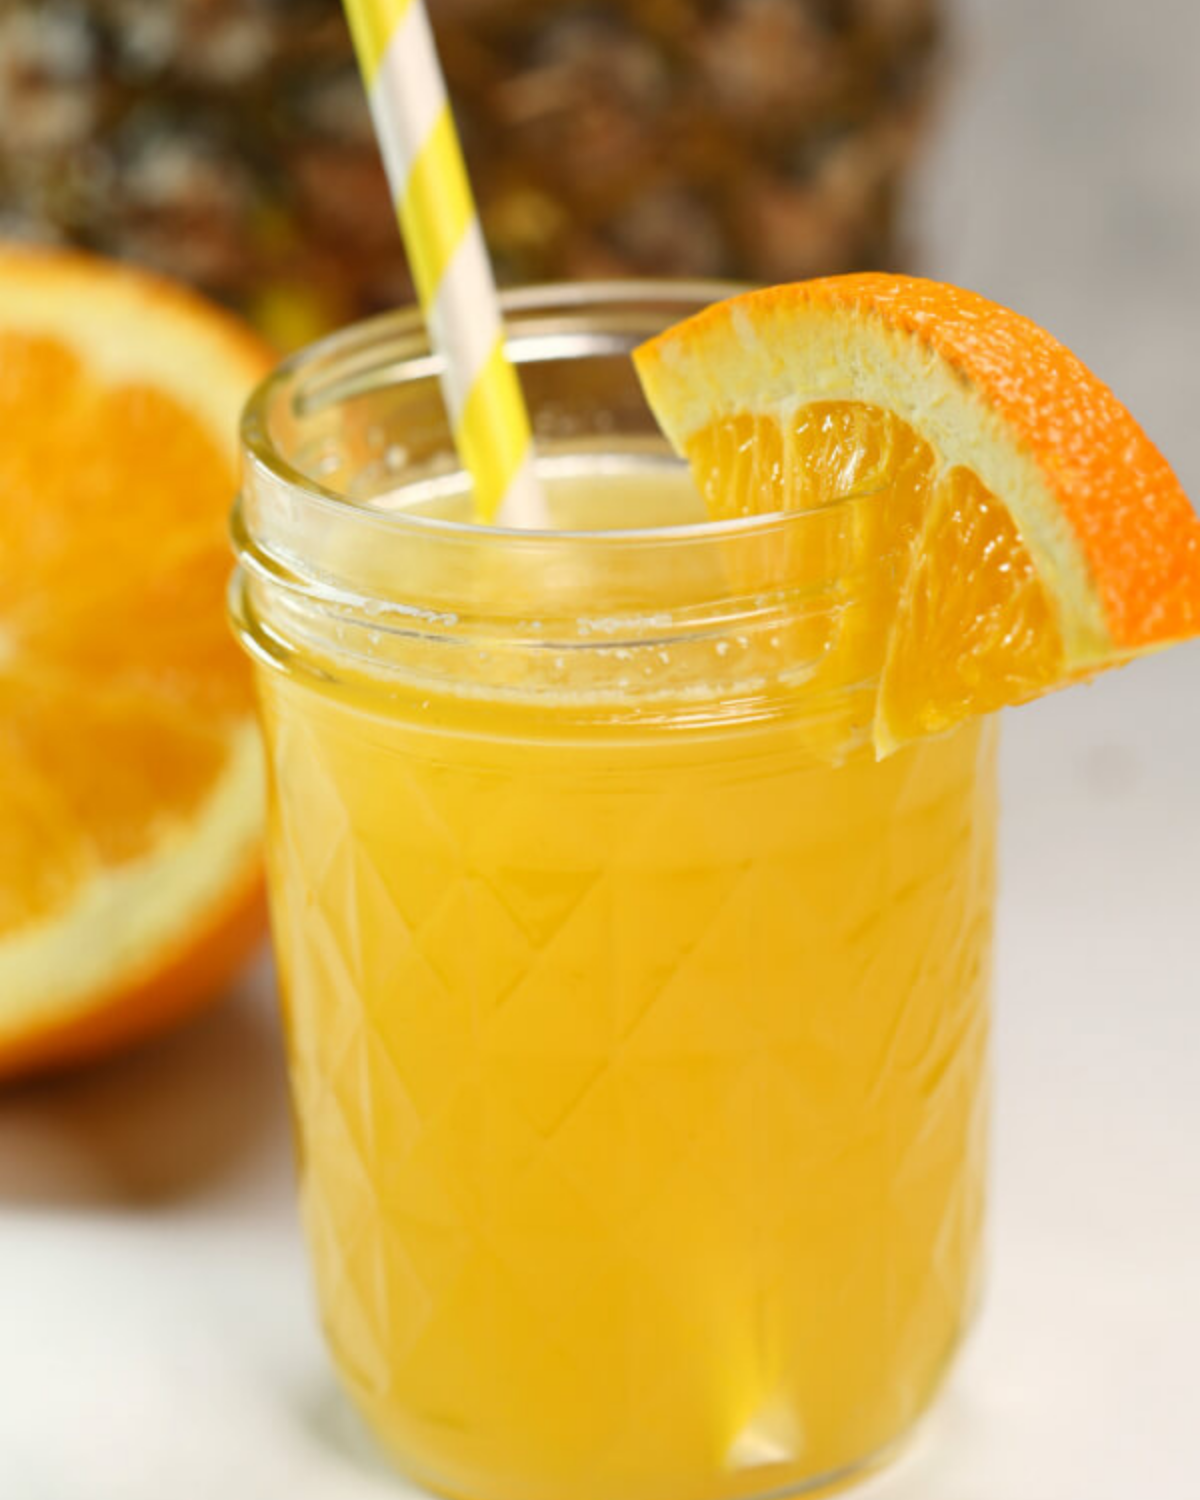 Tropical moonshine flavors in a jar with an orange slice